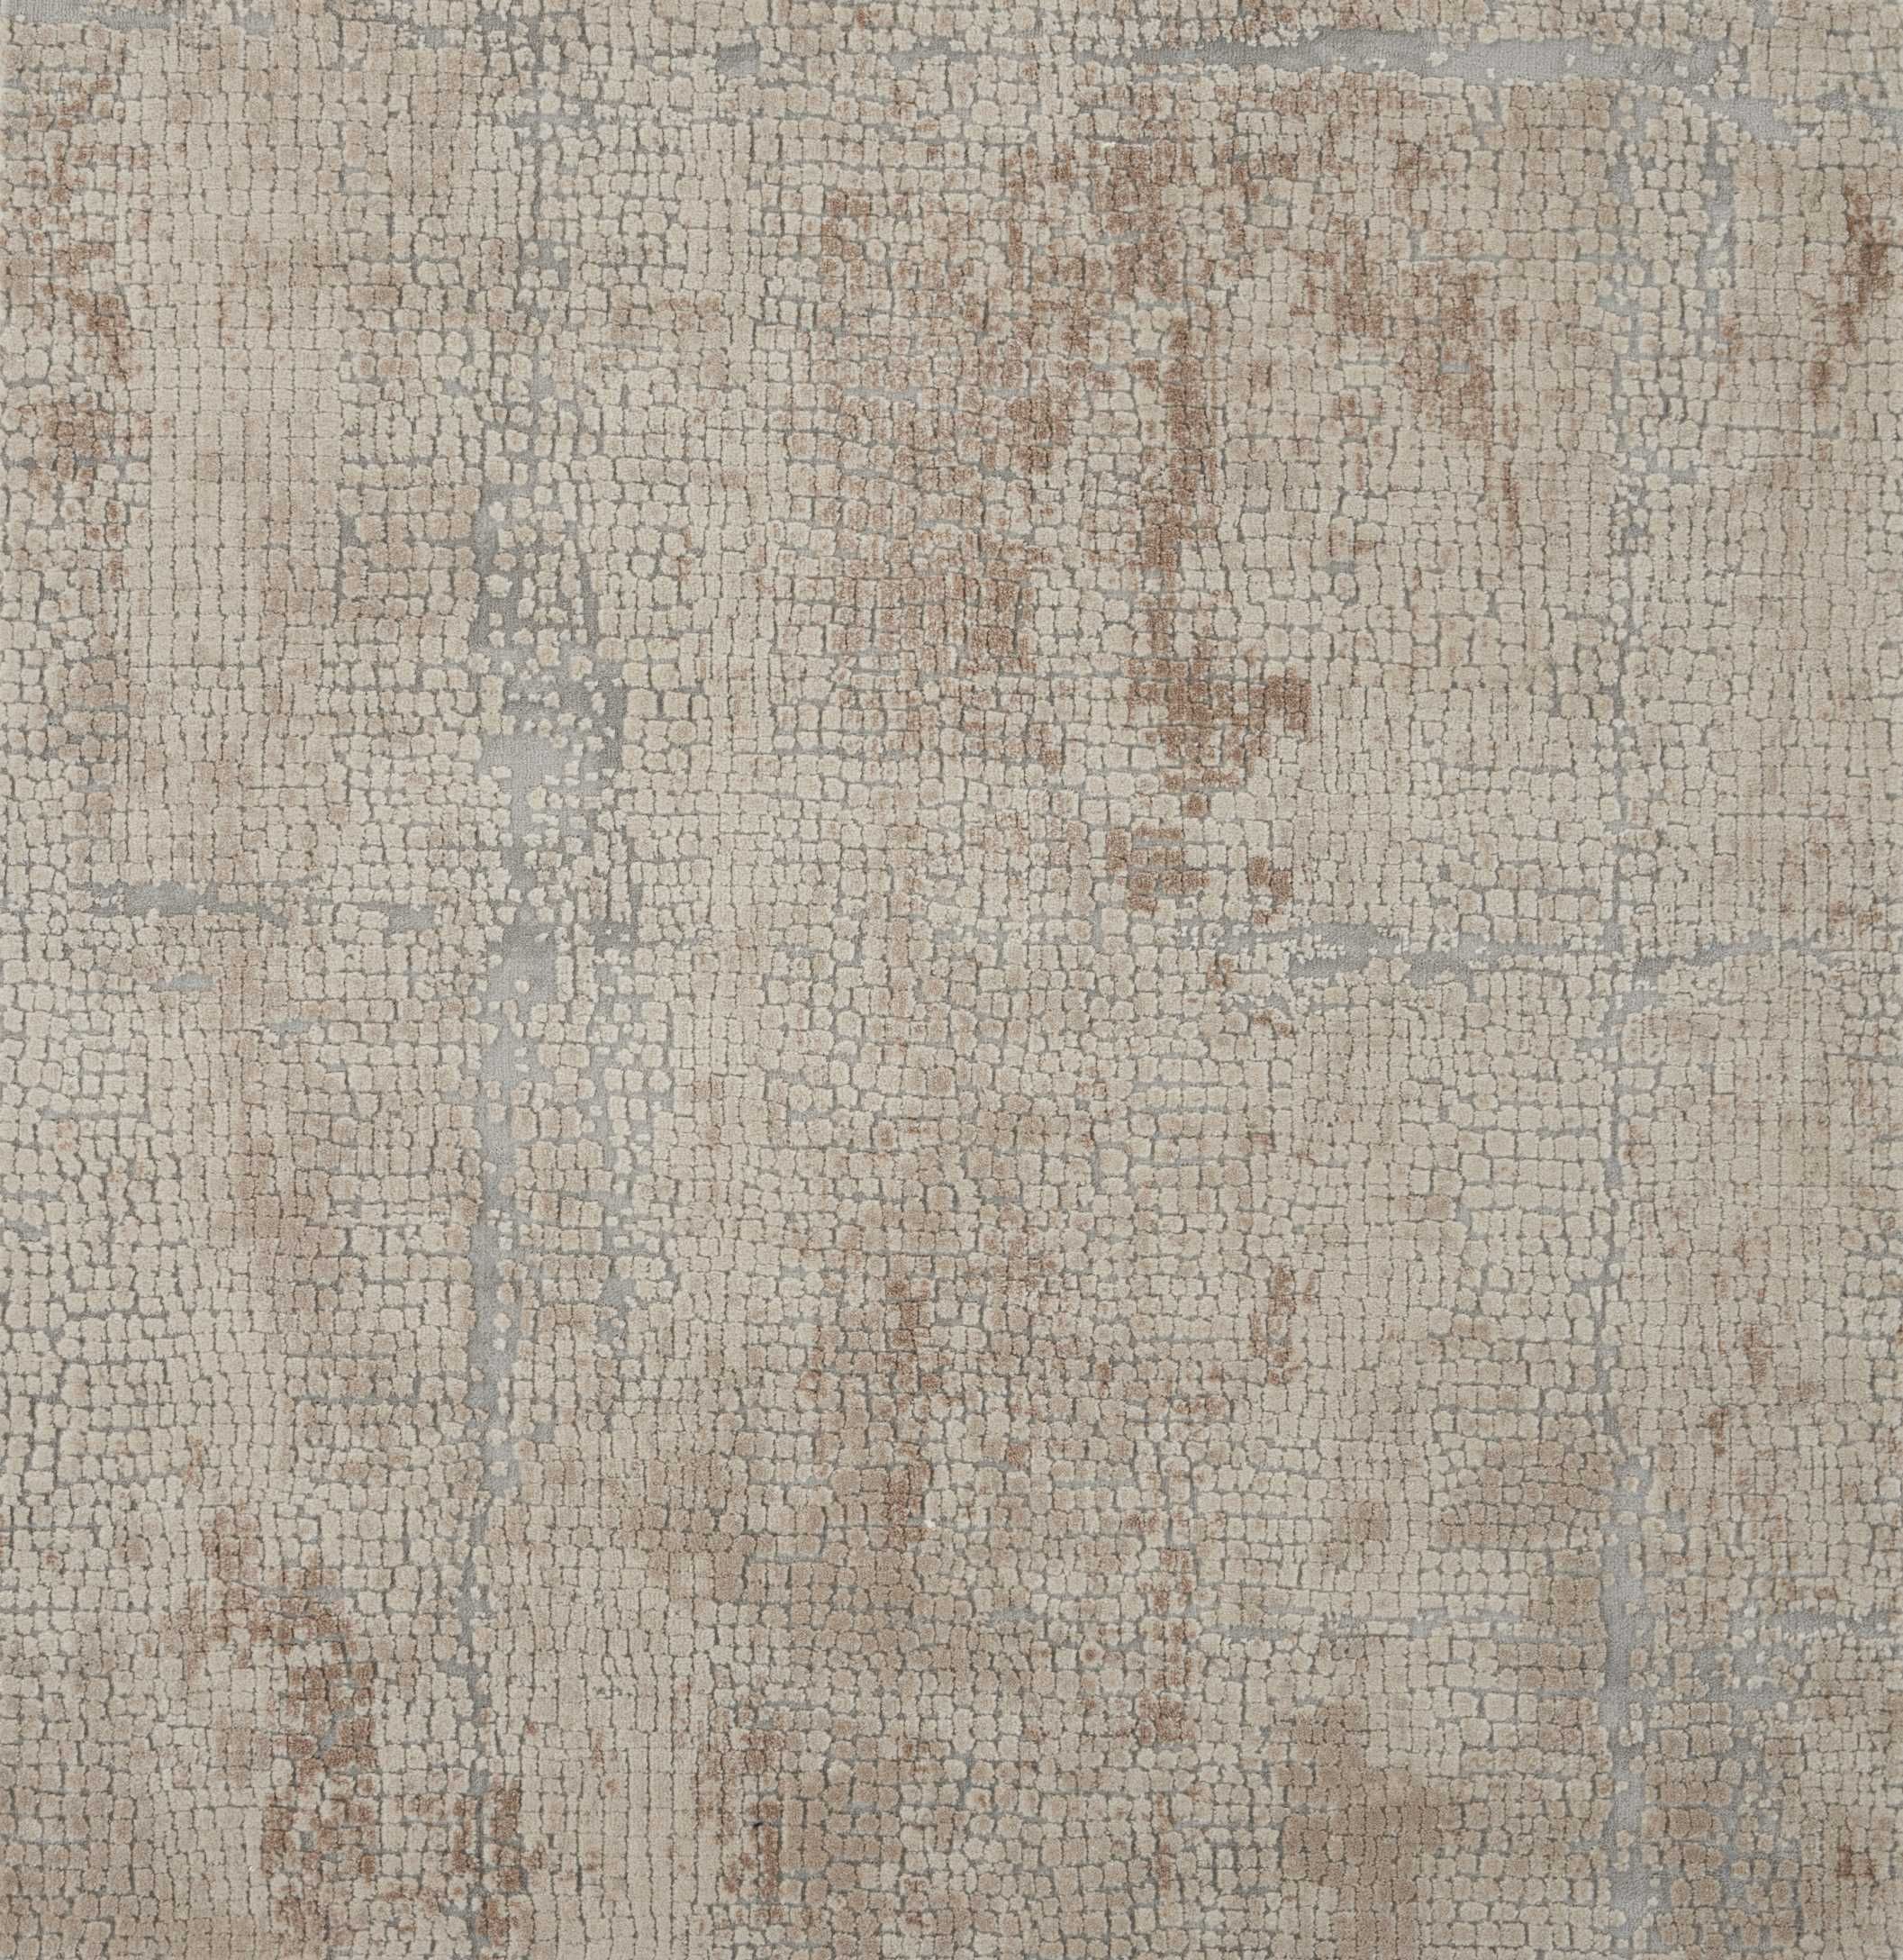 Custom & Wall to Wall RUSTIC TEXTURES ABSTRACT MOSIAC RUS06 SANDSTONE BROADLOOM Camel - Taupe & Lt. Blue - Blue Machine Made Rug